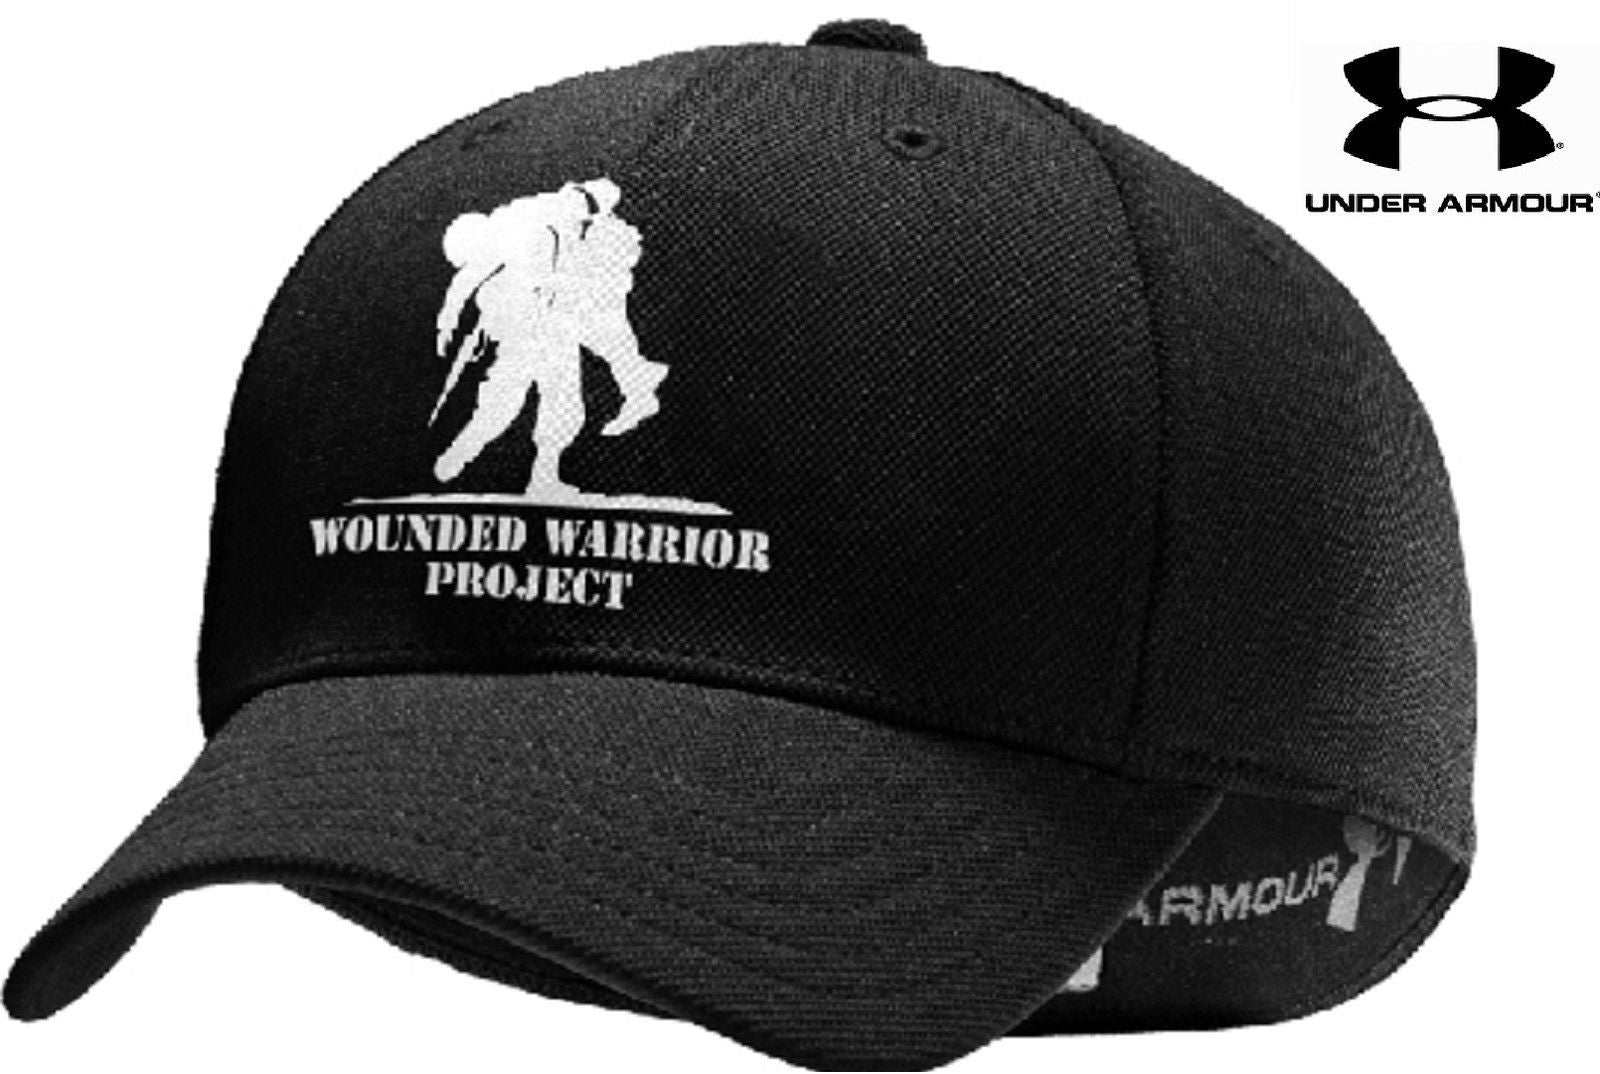 under armour wounded warrior hat